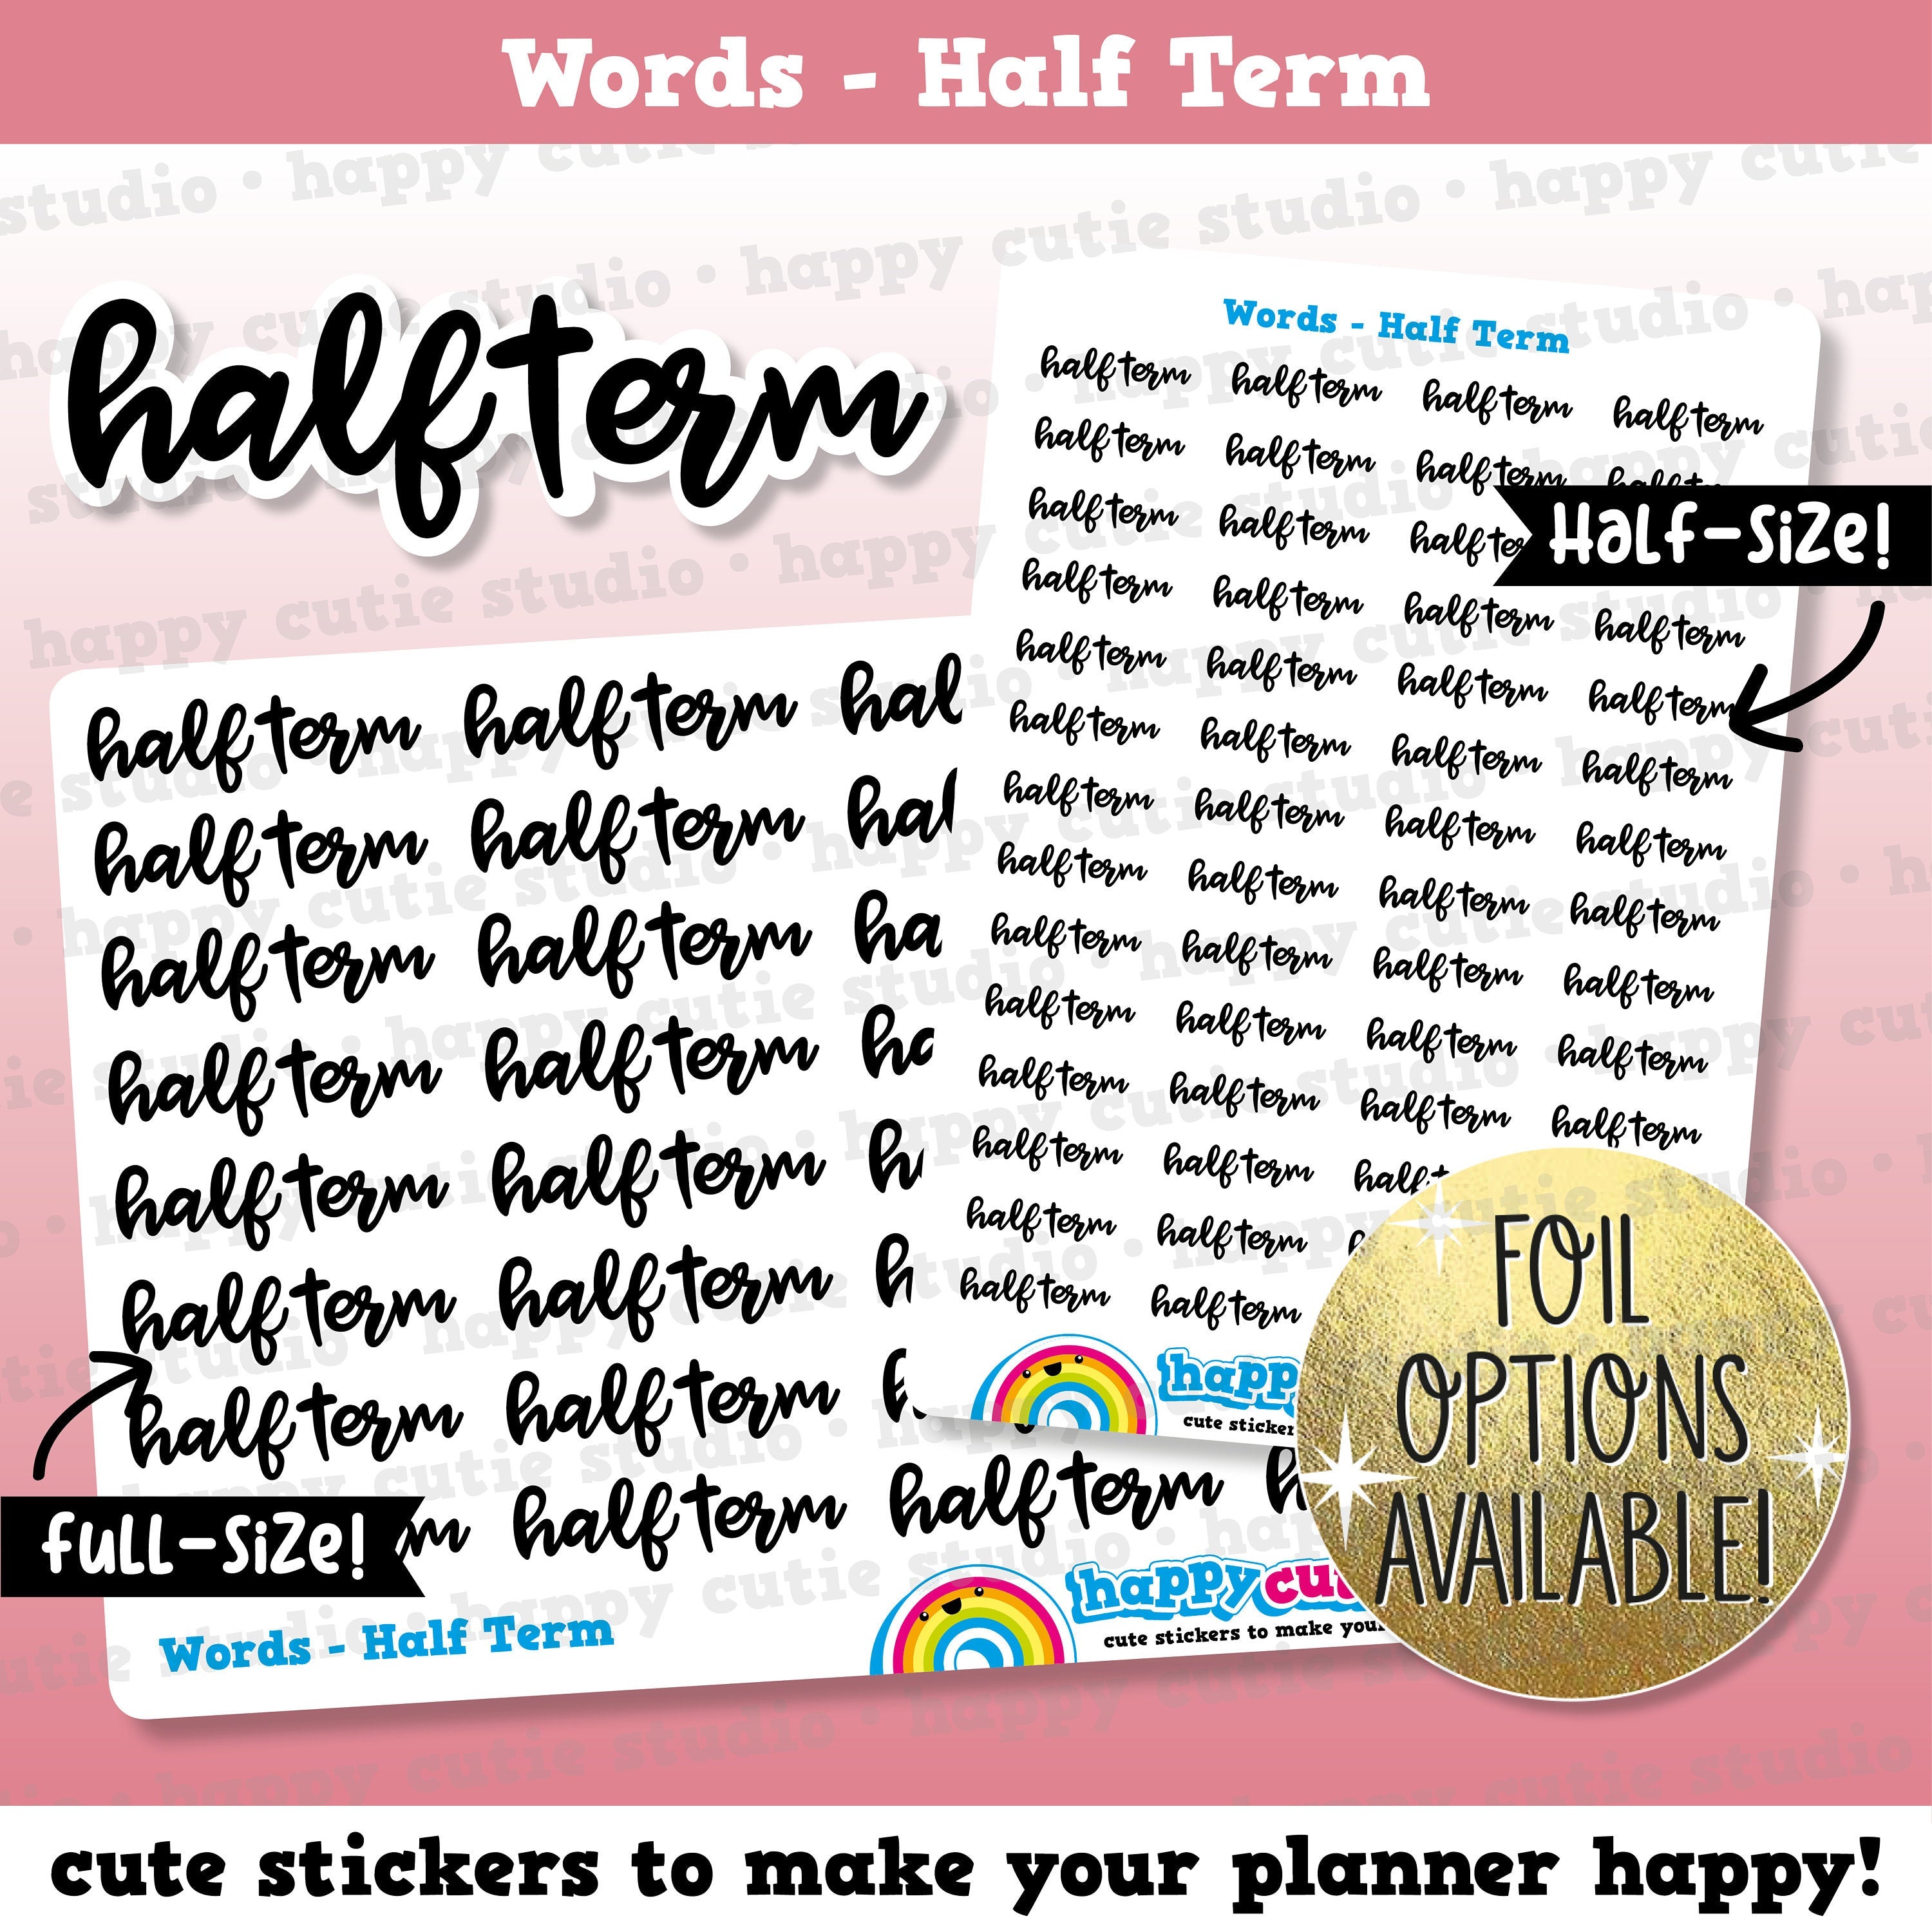 Half Term Words/Functional/Foil Planner Stickers